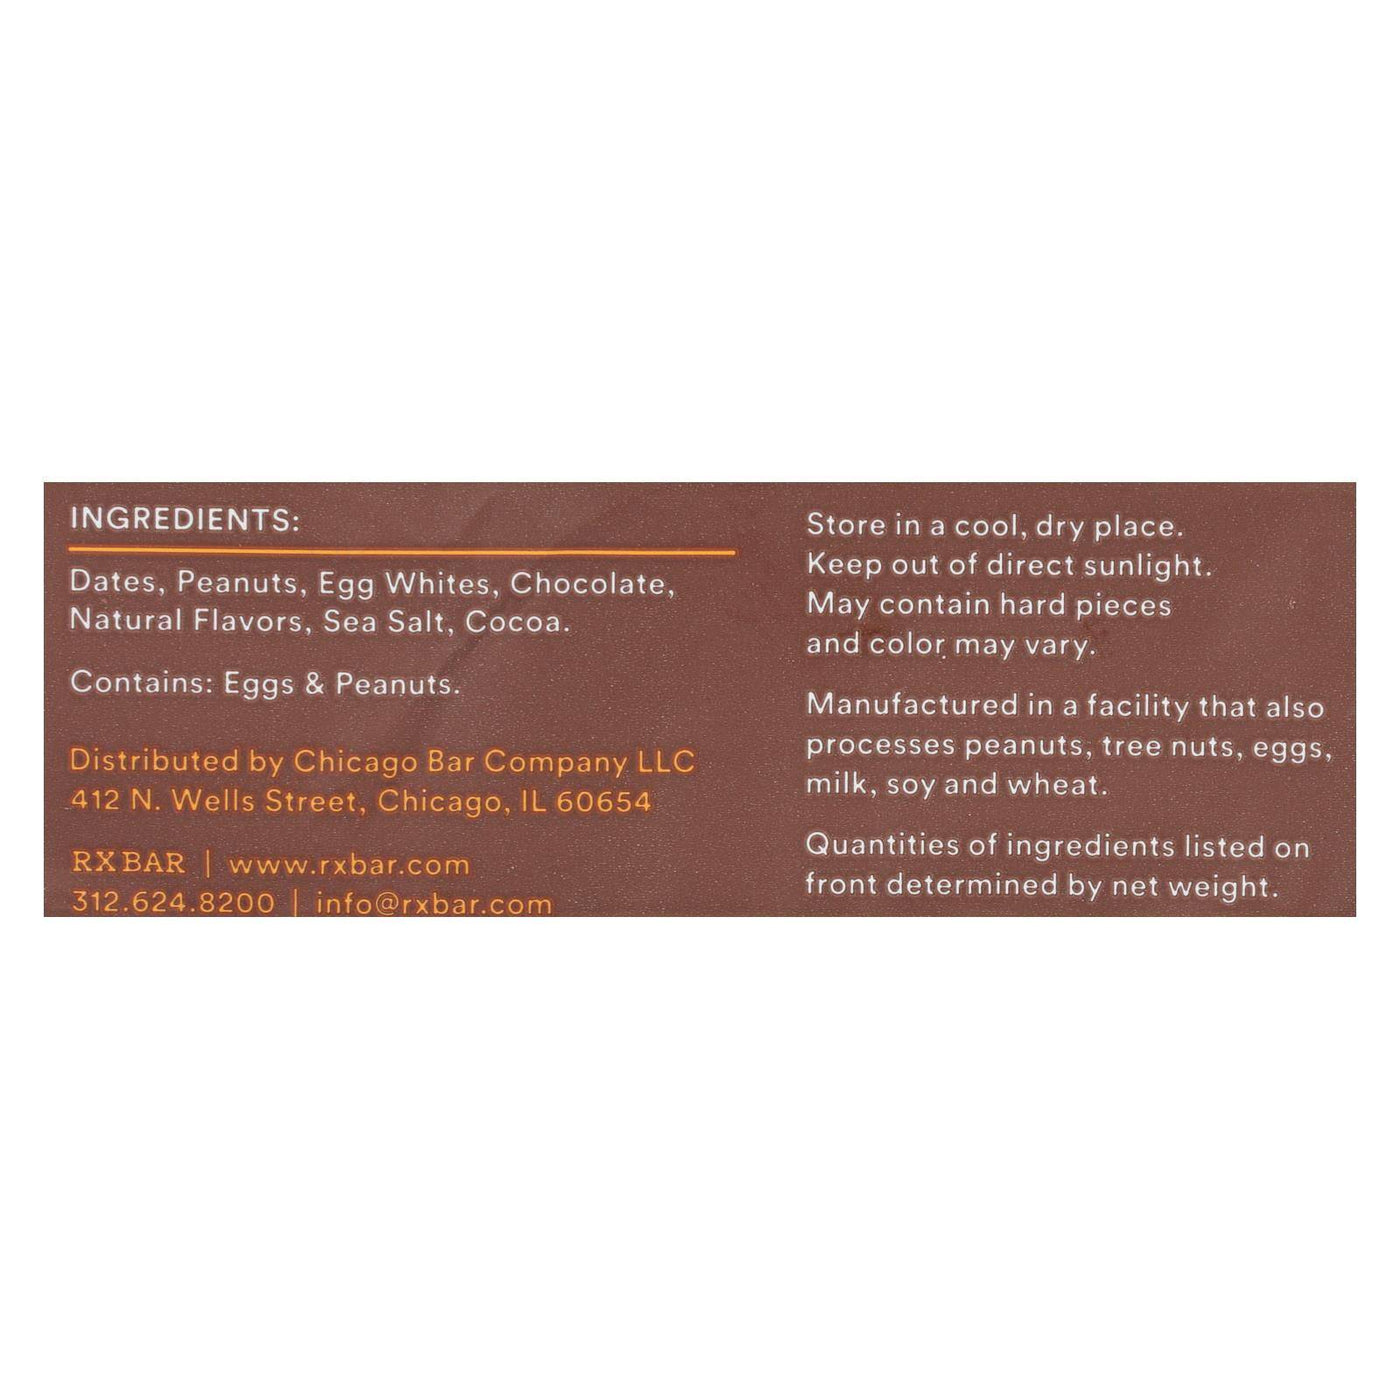 Buy Rxbar - Protein Bar - Chocolate Peanut Butter - Case Of 12 - 1.83 Oz.  at OnlyNaturals.us